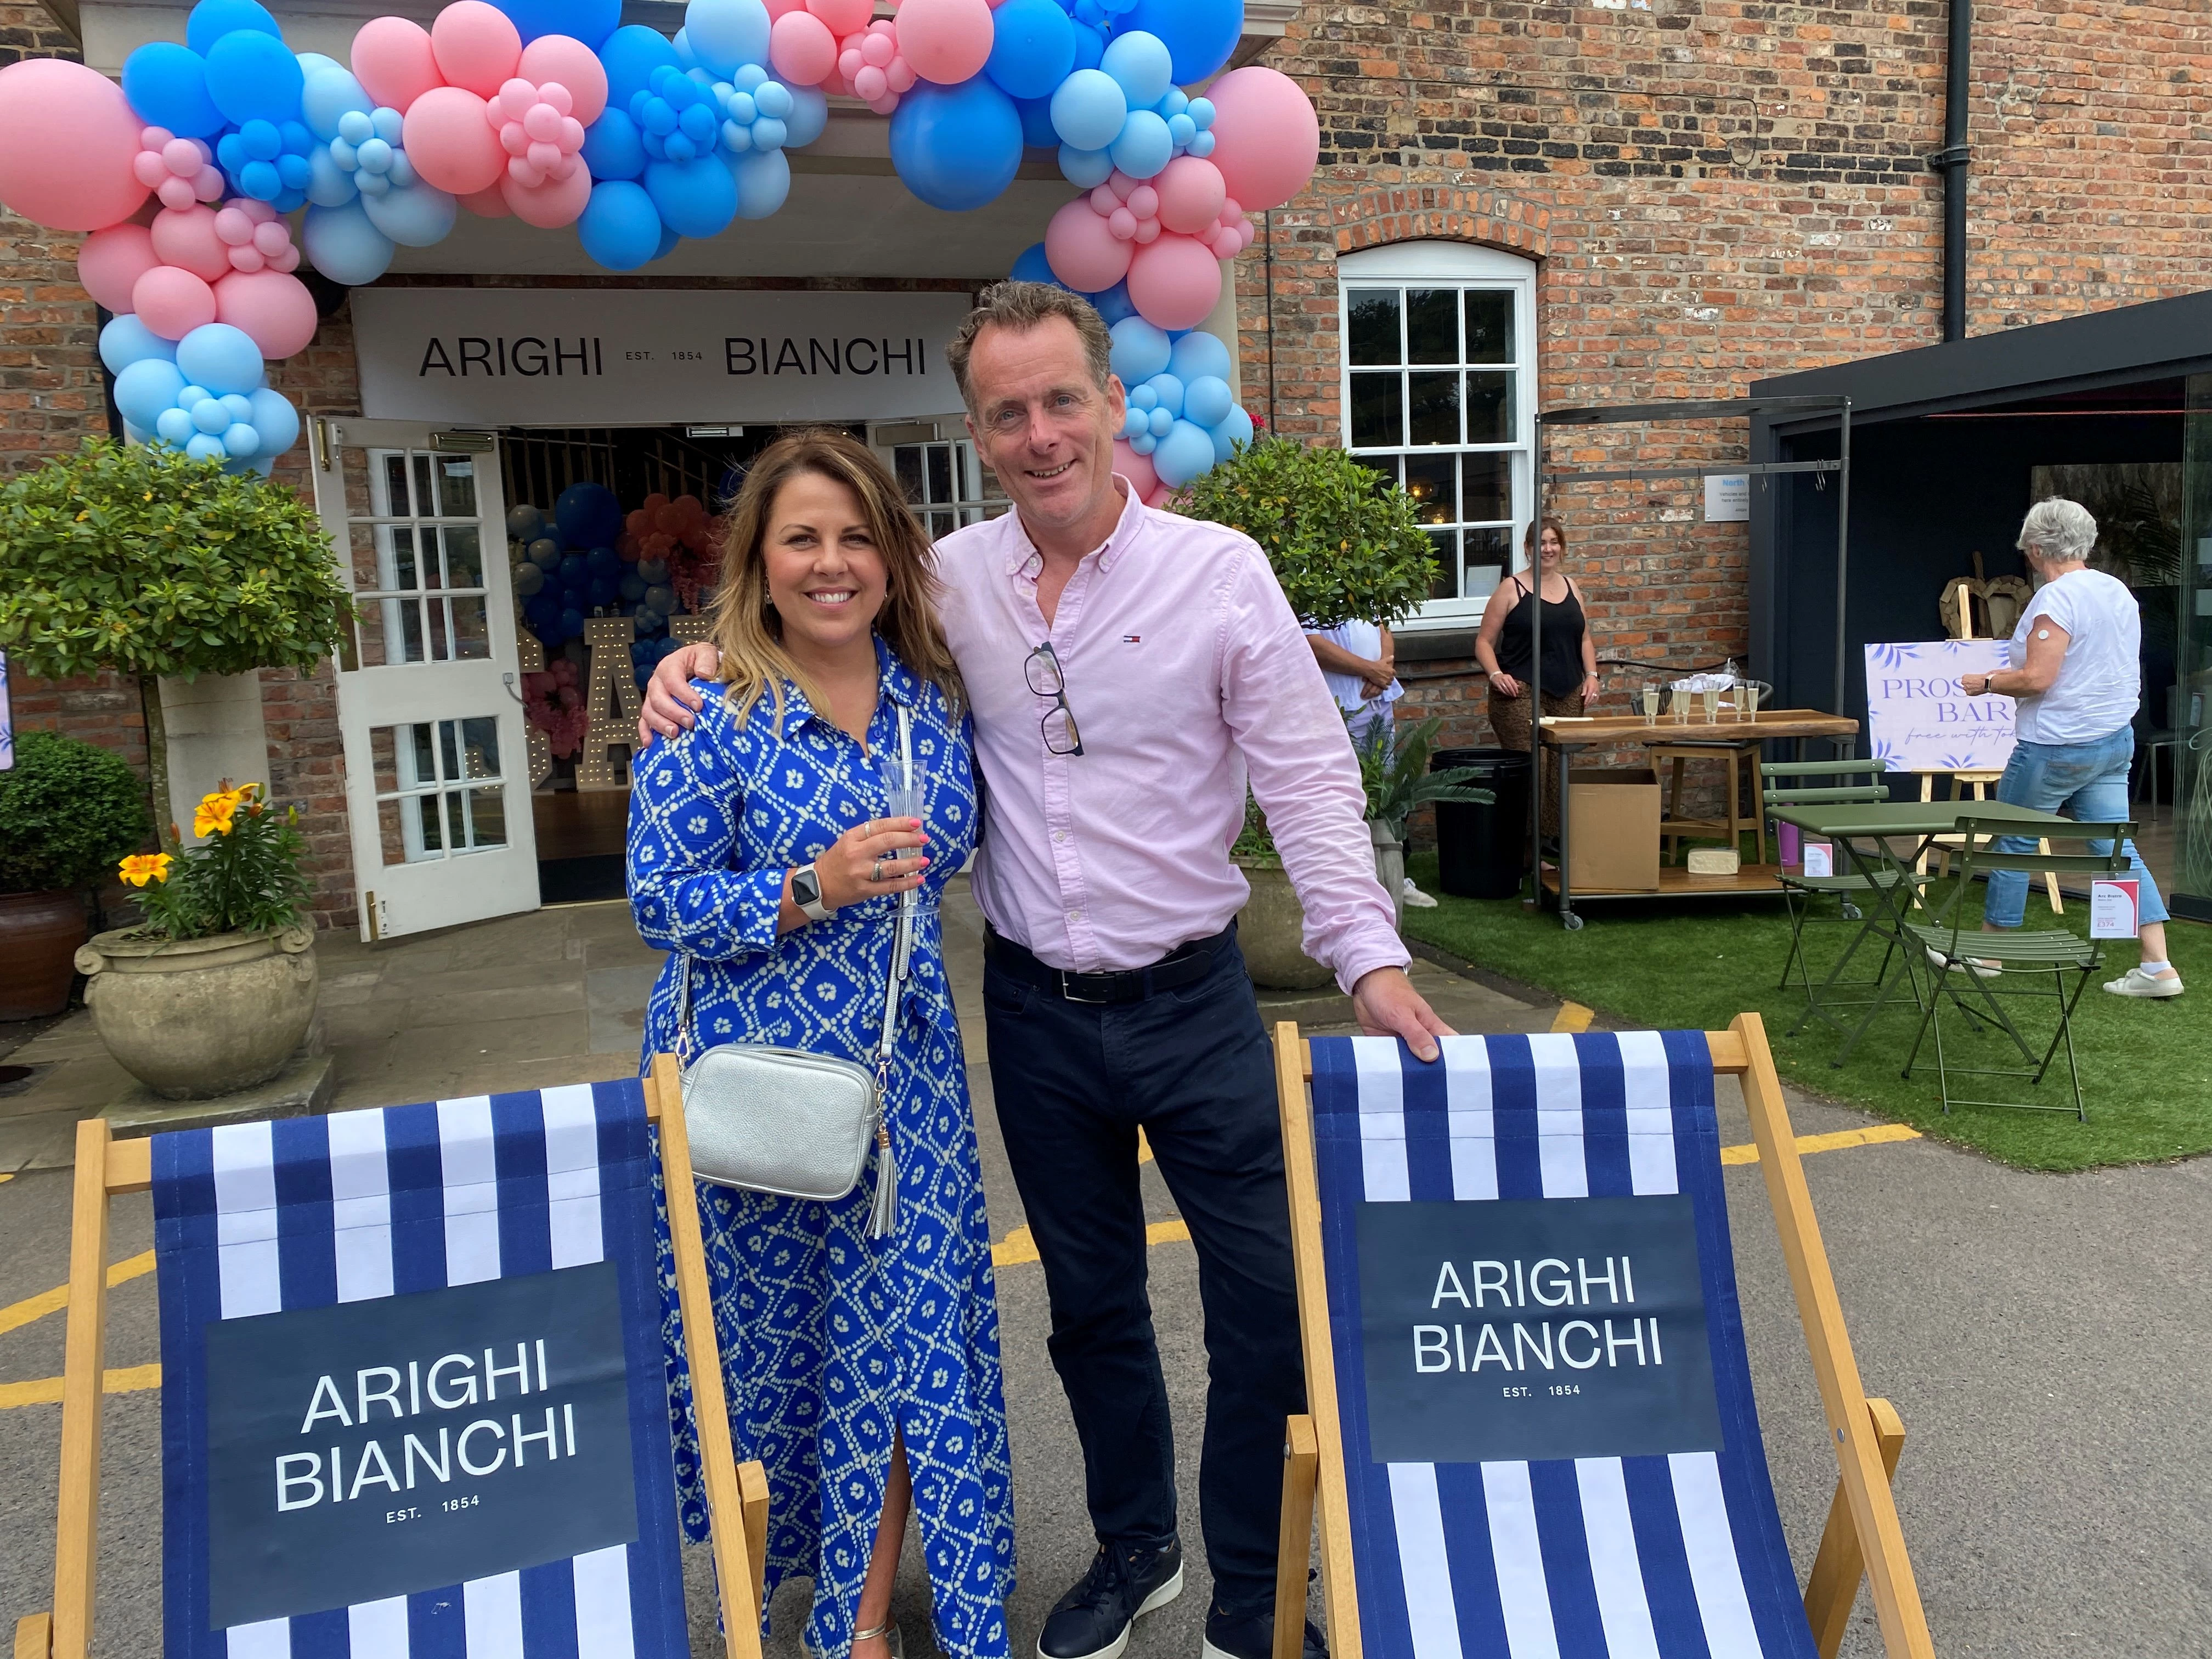 Chelsea Norris from Happy Radio and Nick Bianchi from Arighi Bianchi